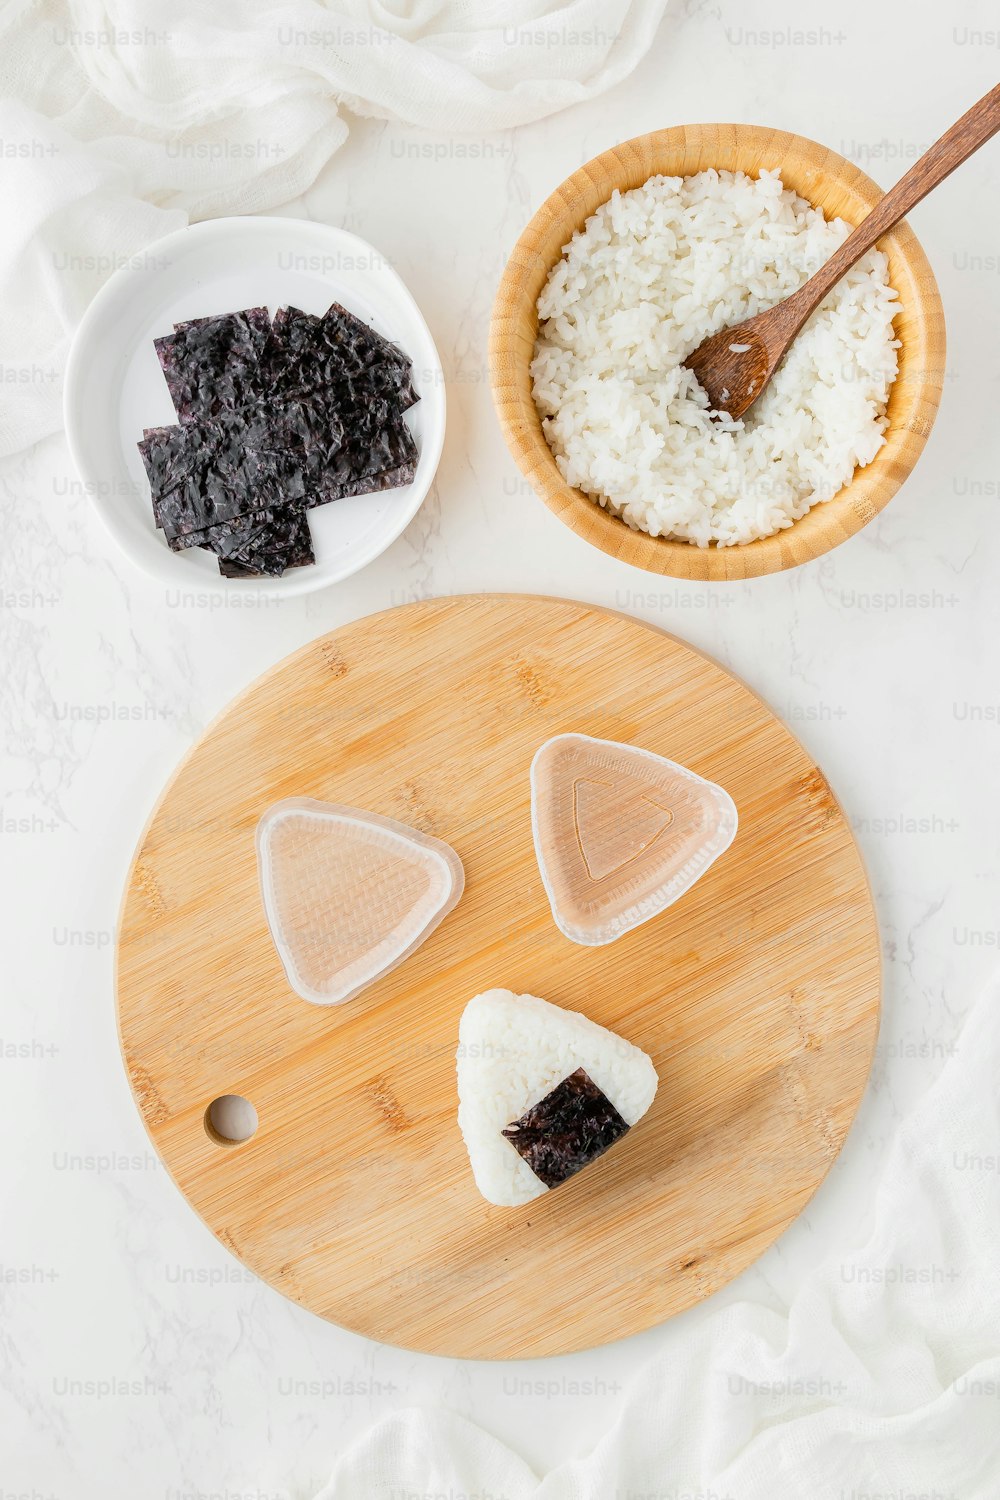 a cutting board topped with slices of cake next to a bowl of rice